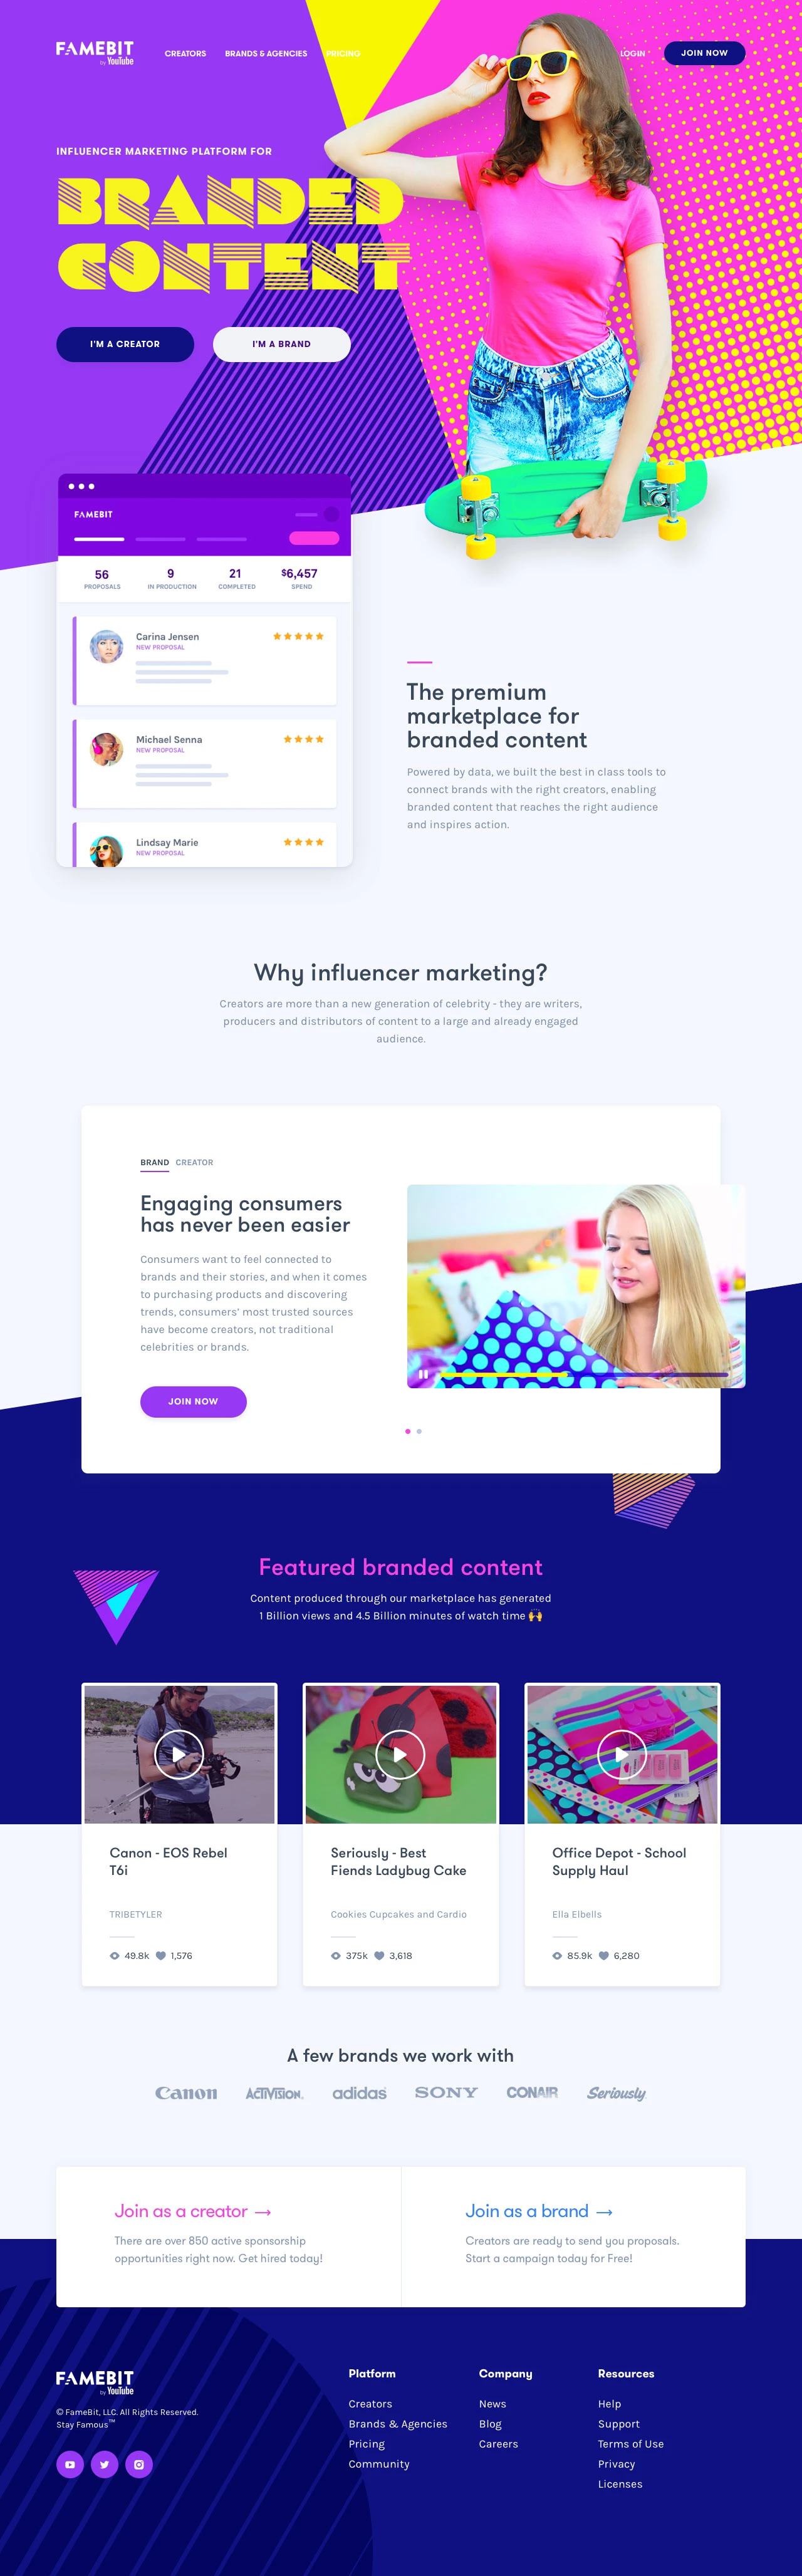 FameBit Landing Page Example: Leading self-service influencer marketing platform where brands and influential creators collaborate for branded content endorsements on YouTube, Instagram, and more.